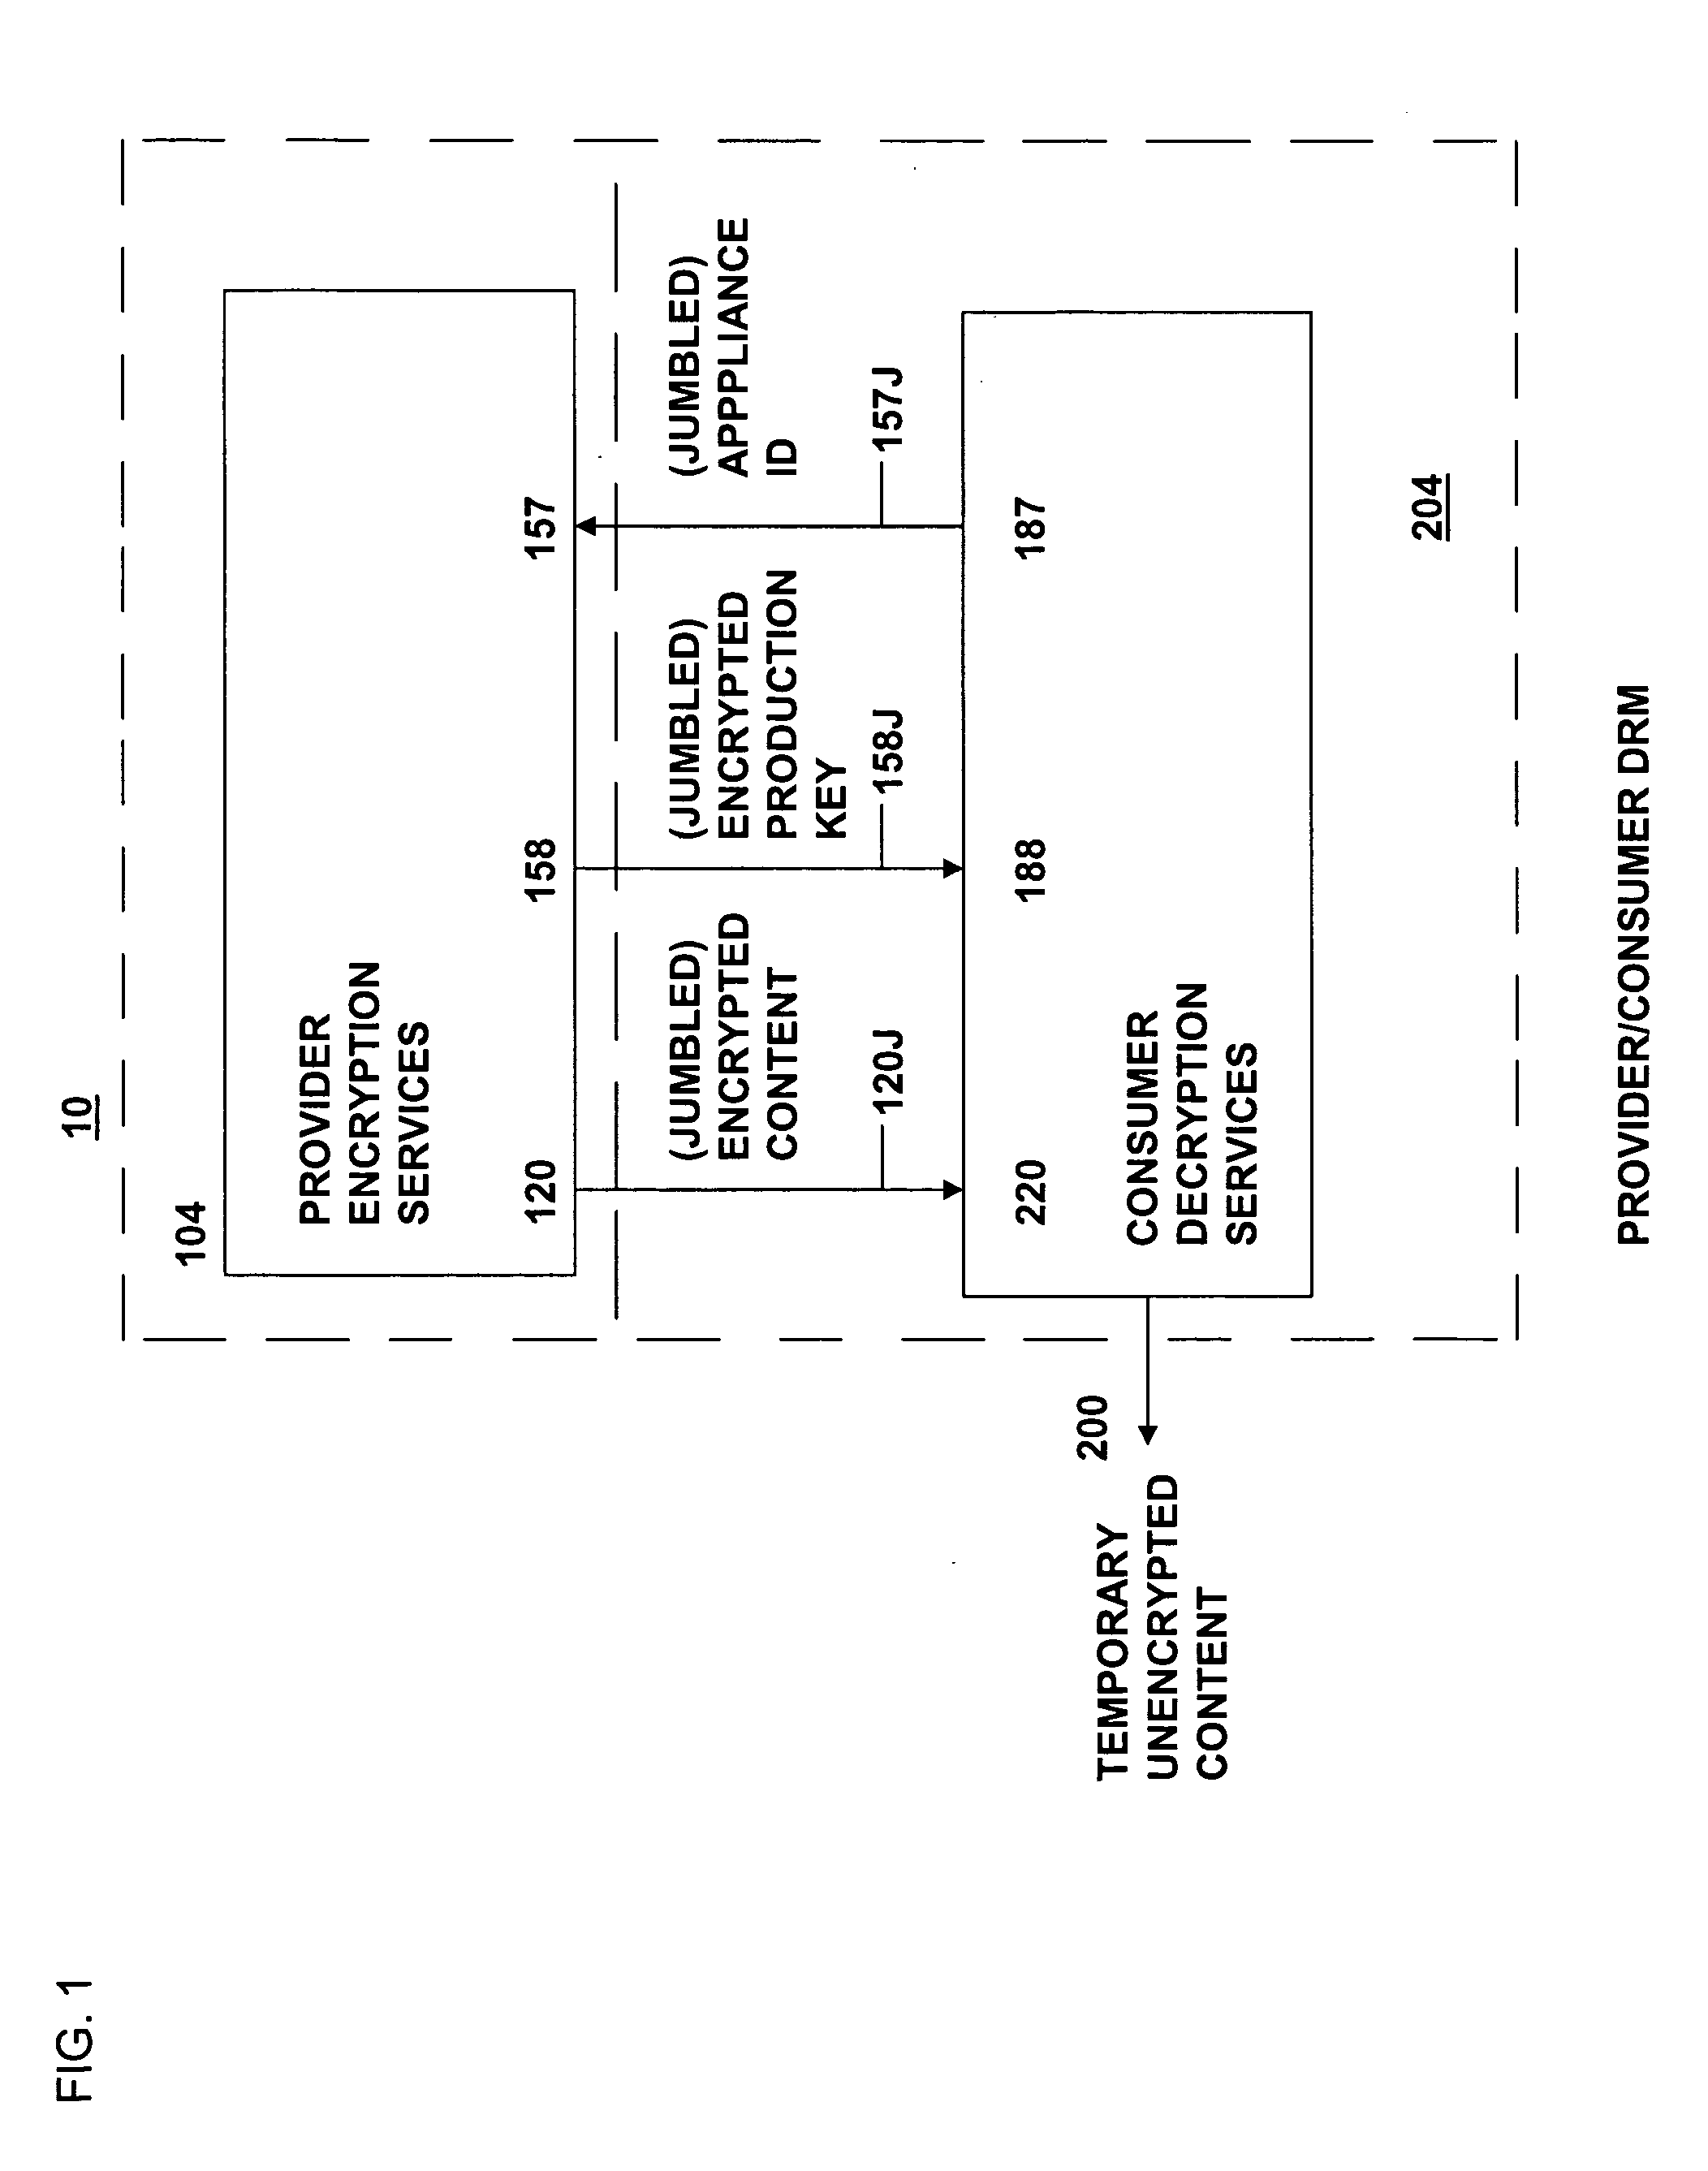 Method and system for secure distribution of selected content to be protected on an appliance specific basis